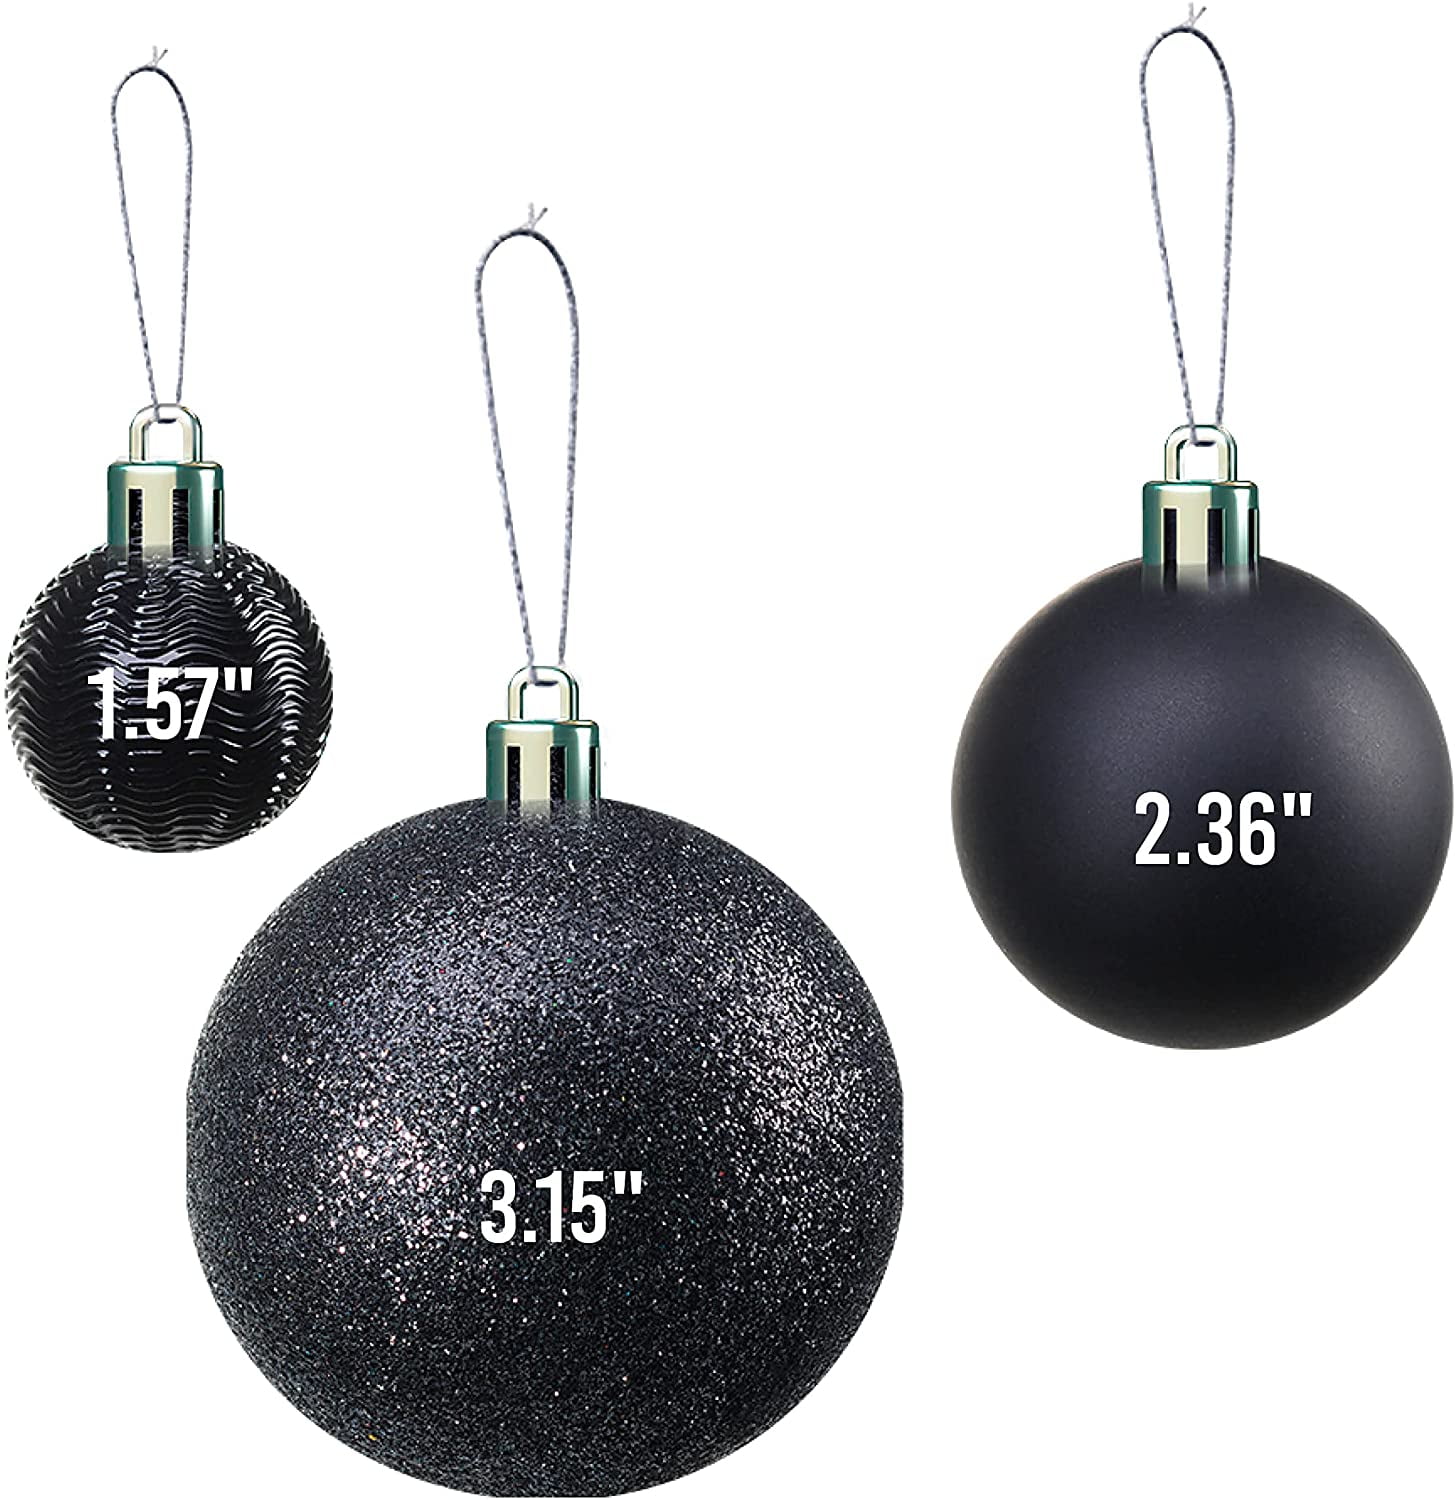 Dyreps Black and Gold Shatterproof Christmas Ball Ornaments - 30pcs 2.36  Inch Gold and Black Balls for Christmas Tree Decorations and Hanging